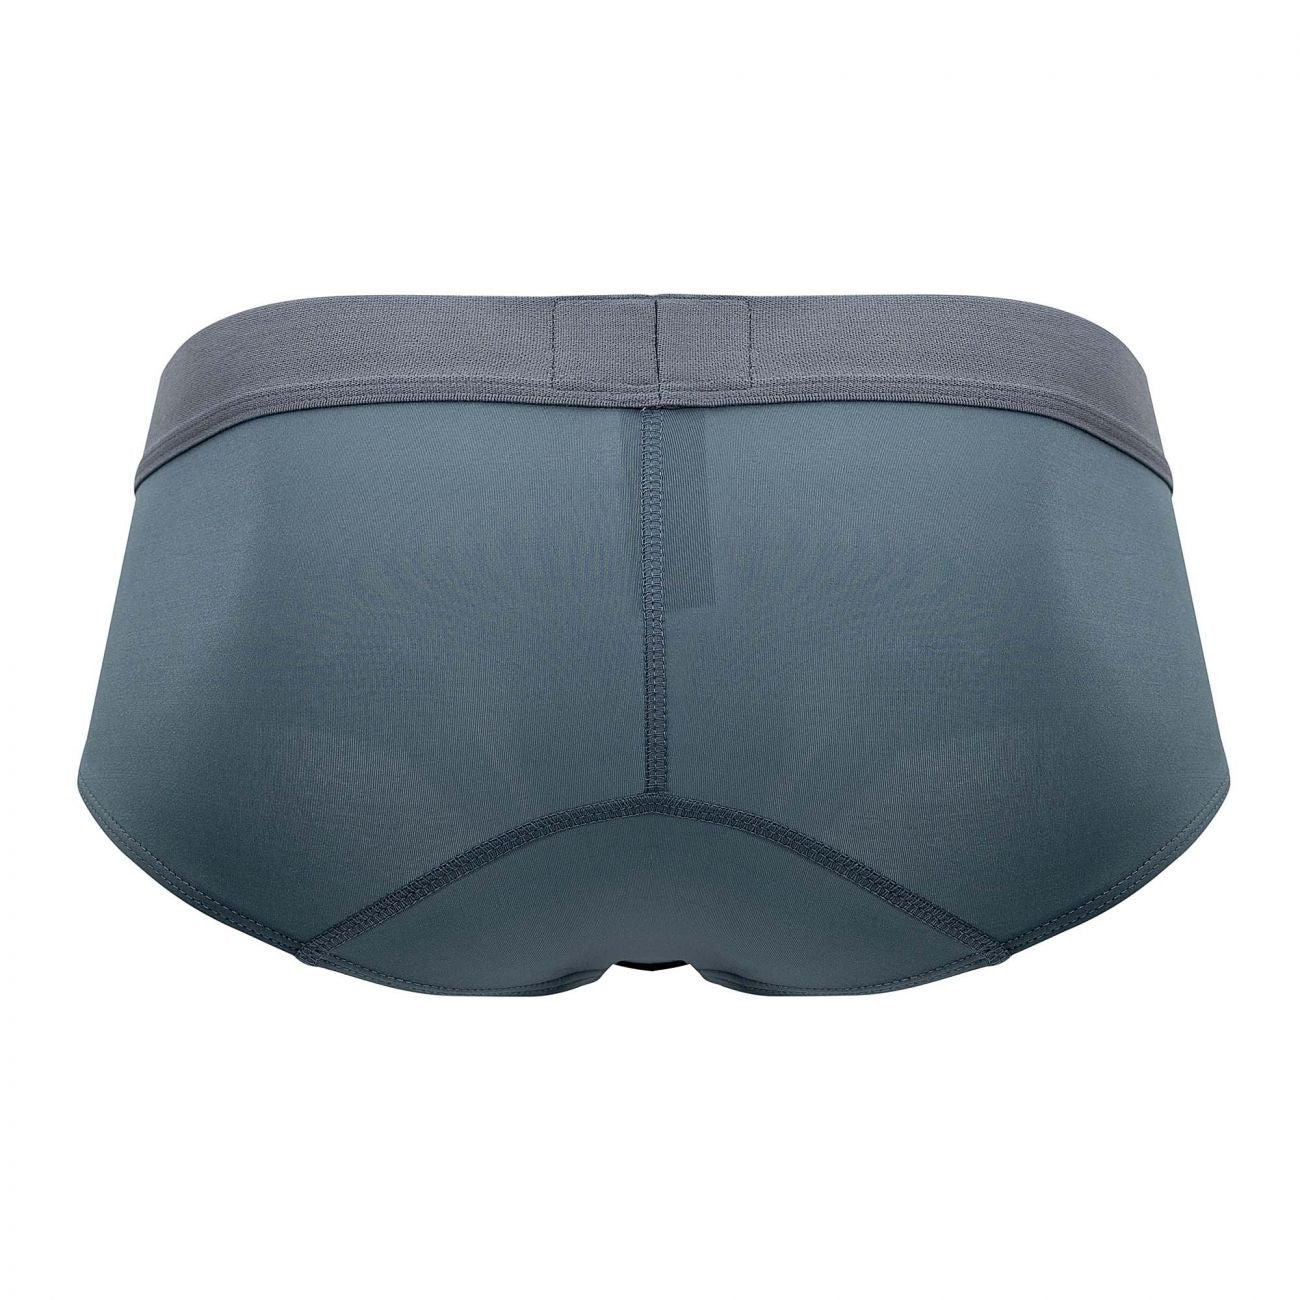 Clever 0900 Lighting Briefs Gray